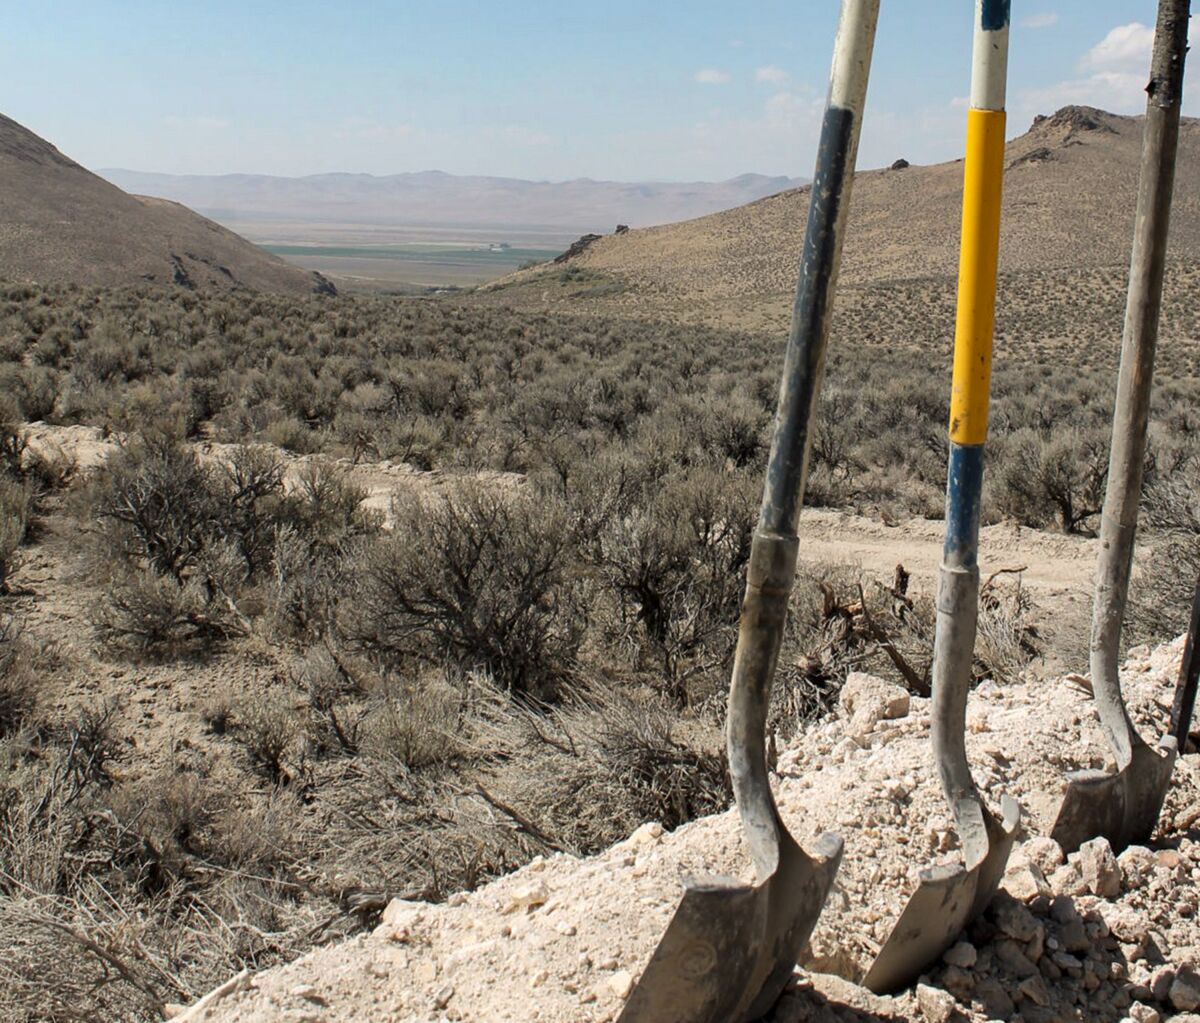 FILE - Exploration drilling continues for Permitting Lithium Nevada Corp.'s Thacker Pass Project on the site between Orovada and Kings Valley, in Humboldt county, Nev., shown beyond a driller's shovels in the distance on Sept. 13, 2018. A federal judge on Monday, Feb. 6, 2023, ordered the government to revisit part of its environmental review of a lithium mine planned in Nevada but denied opponents' effort to block the project in a ruling the developer says clears the way for construction at the largest known U.S. lithium deposit. (Suzanne Featherston/The Daily Free Press via AP, File)